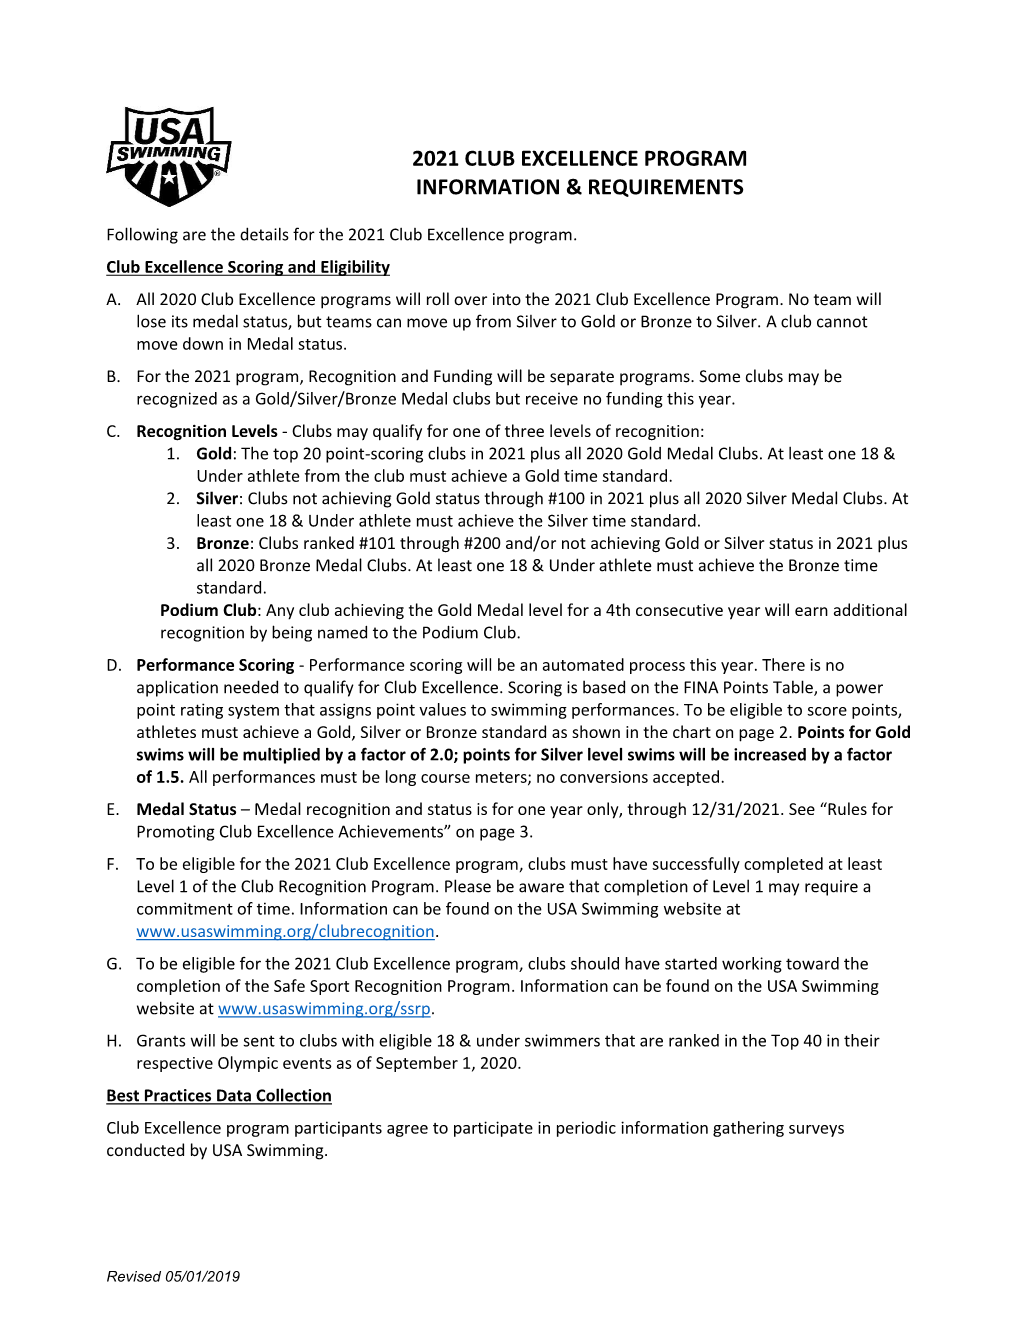 2021 Club Excellence Program Information & Requirements